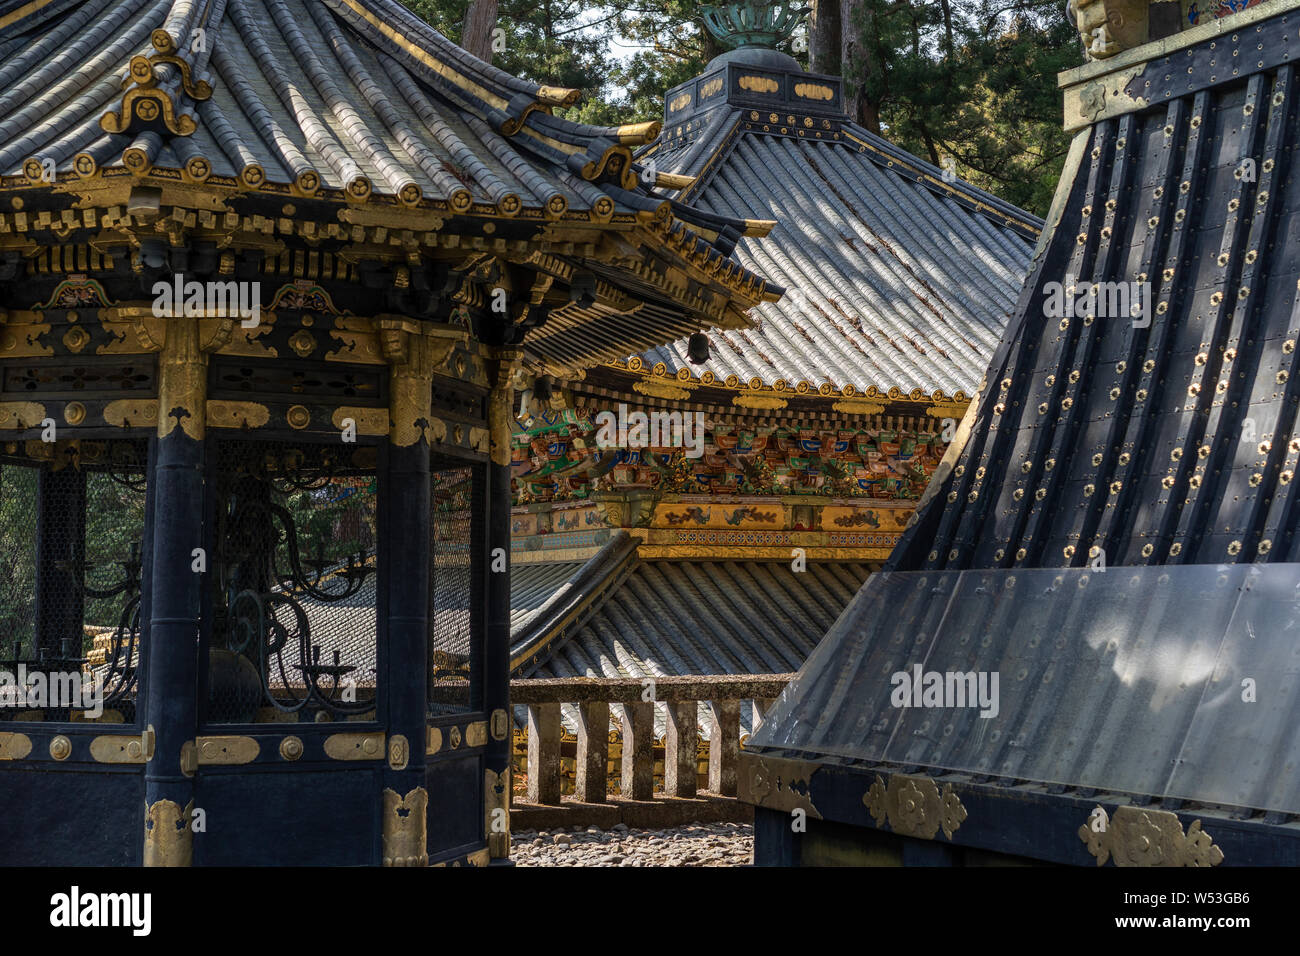 Yomeimon Gate. Japan's most ornate structure, giving off a grand and imposing air with its intricate decorations and features. Nikko, Japan Stock Photo